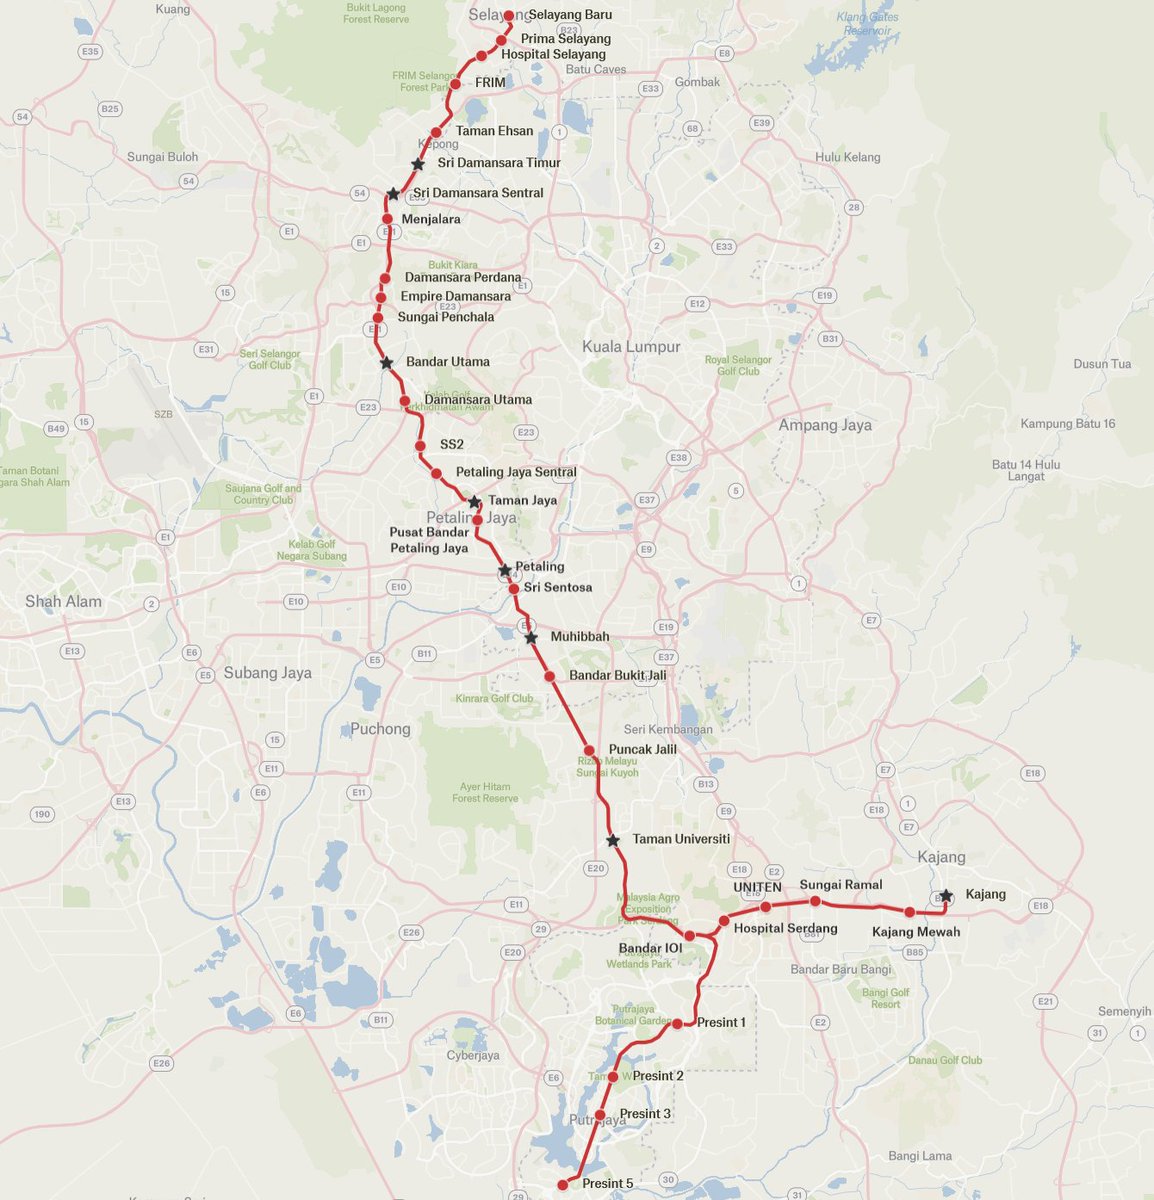 It's time we think big Let's build a LRT4 from Selayang all the way to Putrajaya with a branch to Kajang Selayang to Putrajaya OR Kajang in 75 minutes, and Kajang to Putrajaya in 30 minutes